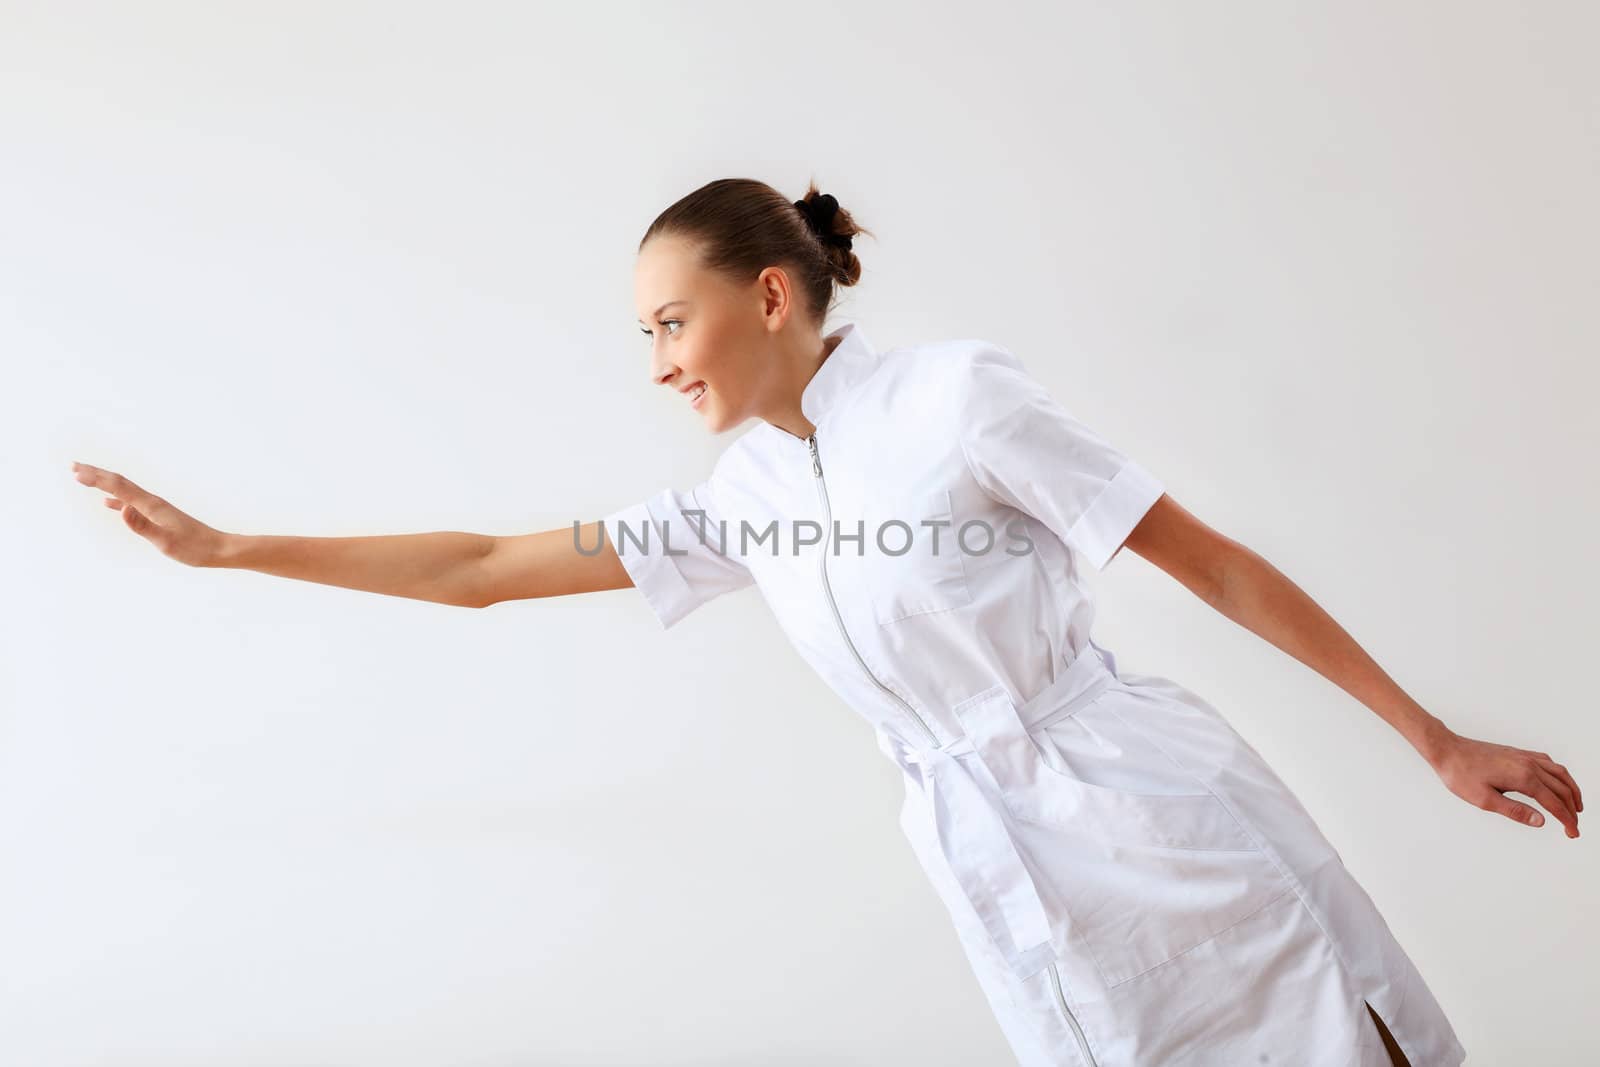 Young female doctor in white uniform at workplace